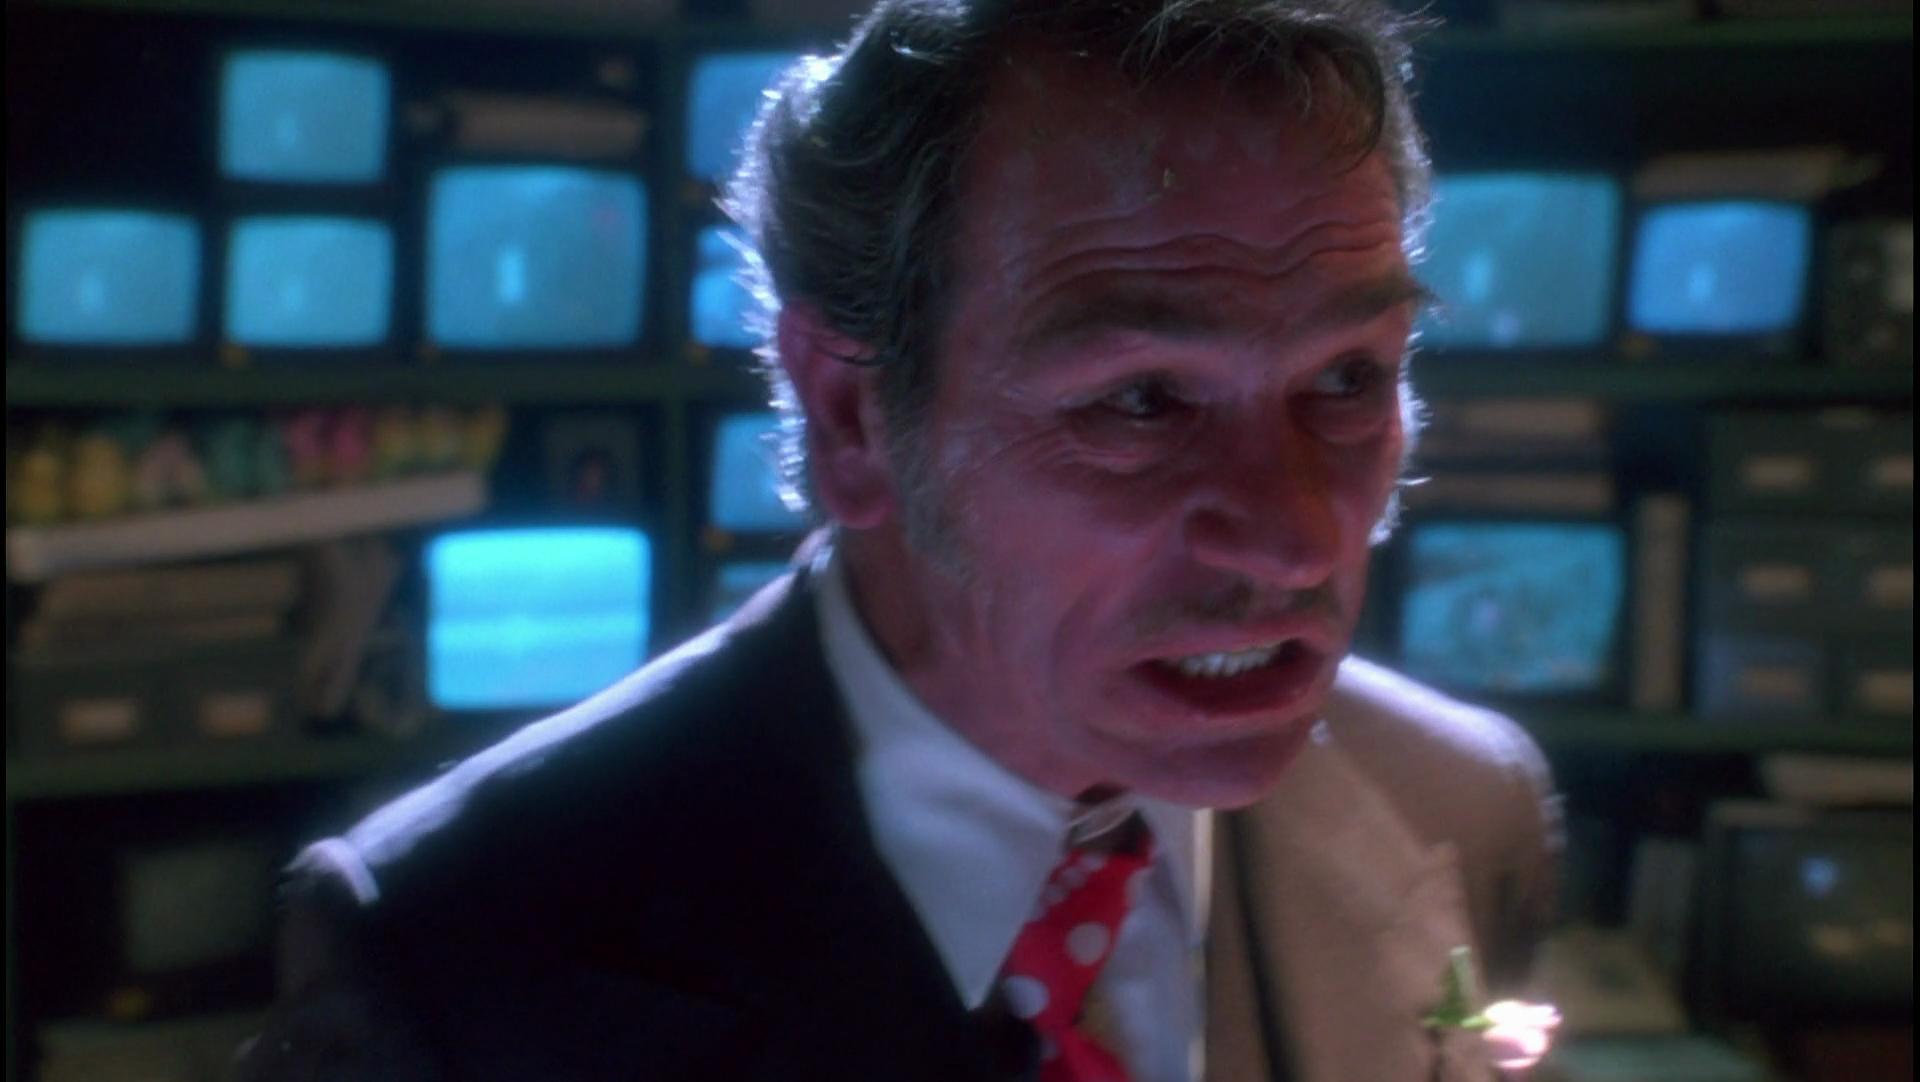 Happy Birthday to Tommy Lee Jones, who turns 75 today!!!

What is your favorite movie starring Tommy Lee Jones? 